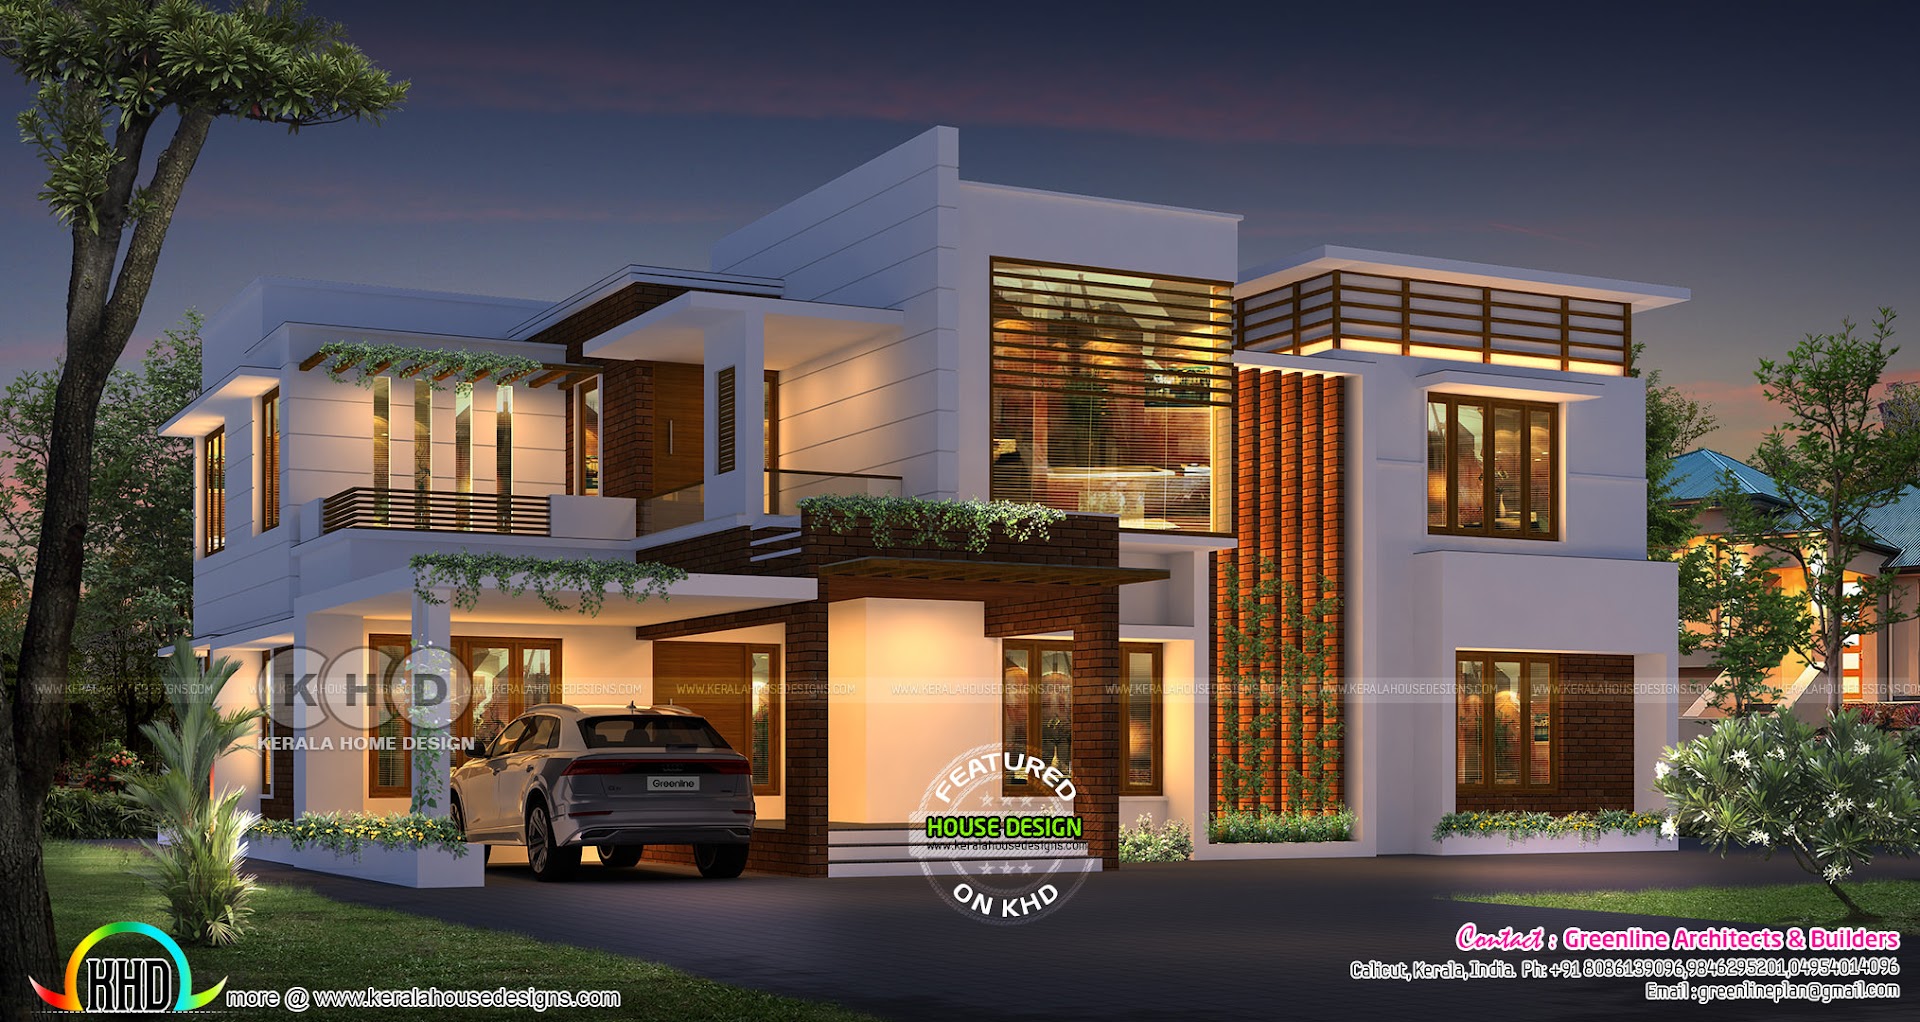 5 bedroom contemporary house night view rendering | Kerala home design ...